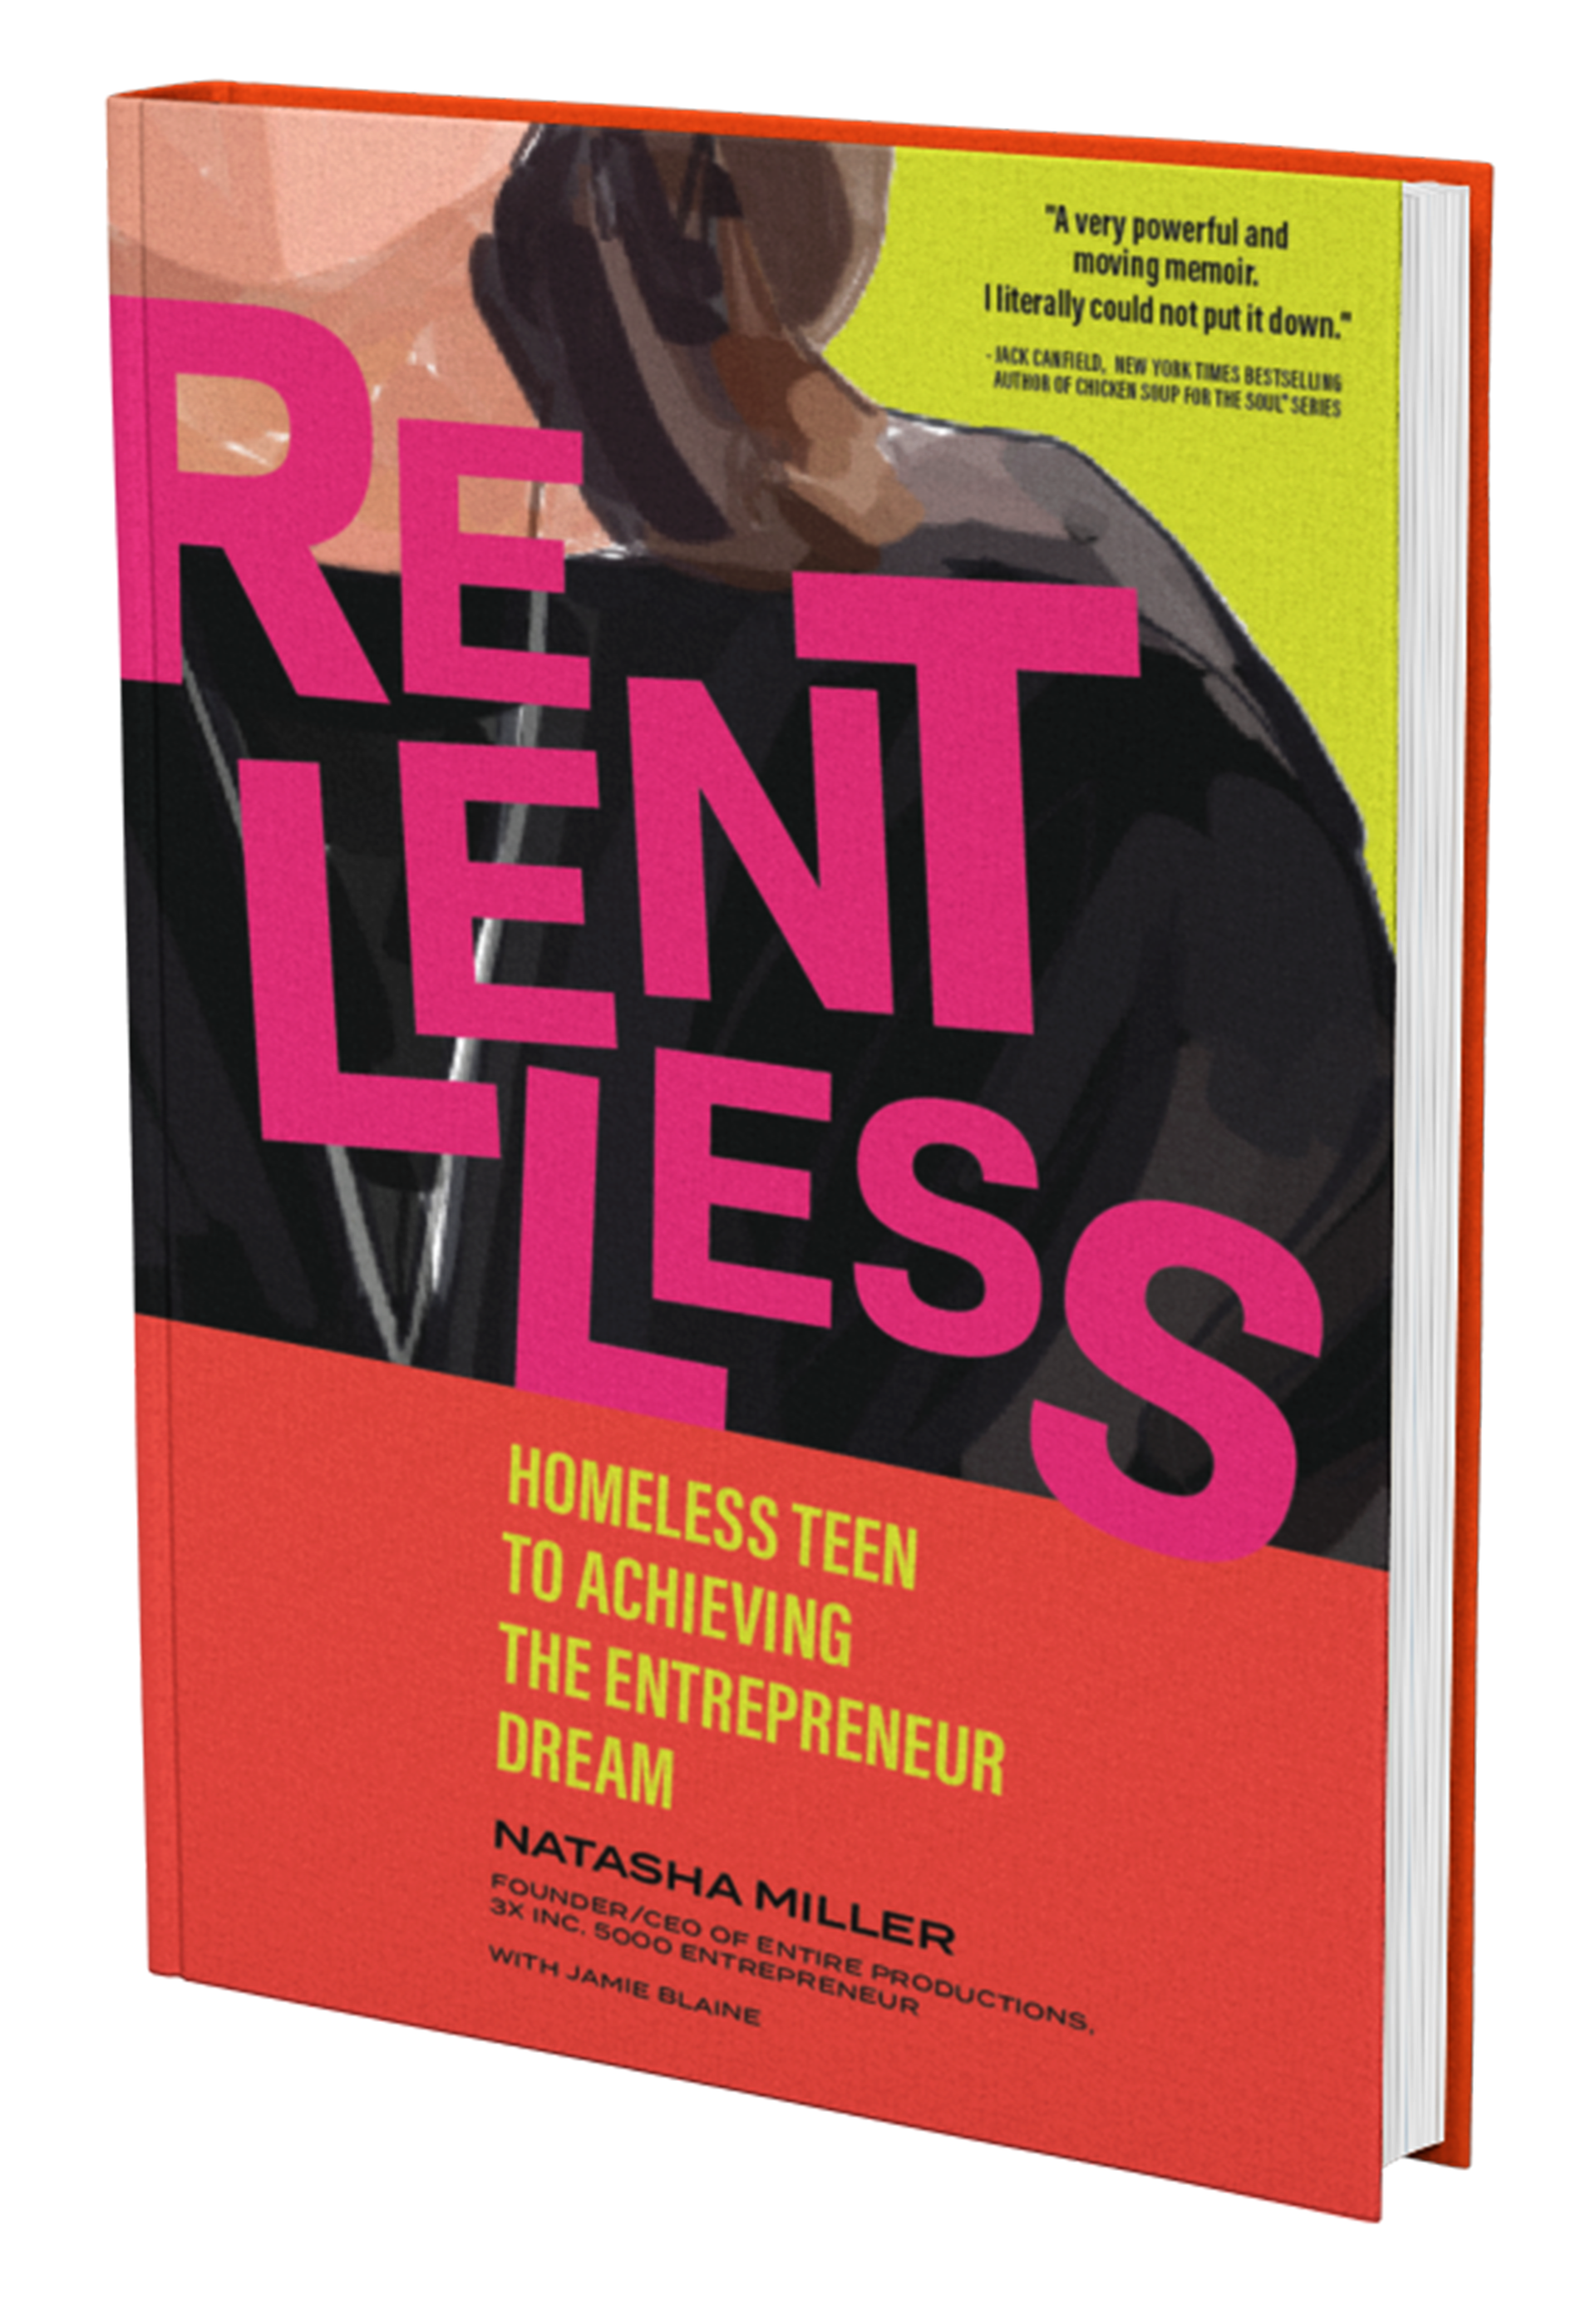 From a Youth Shelter to The Inc. 5000, Bay Area Business Owner, Natasha Miller, Releases Memoir Titled, "Relentless: Homeless Teen to Achieving the Entrepreneur Dream"